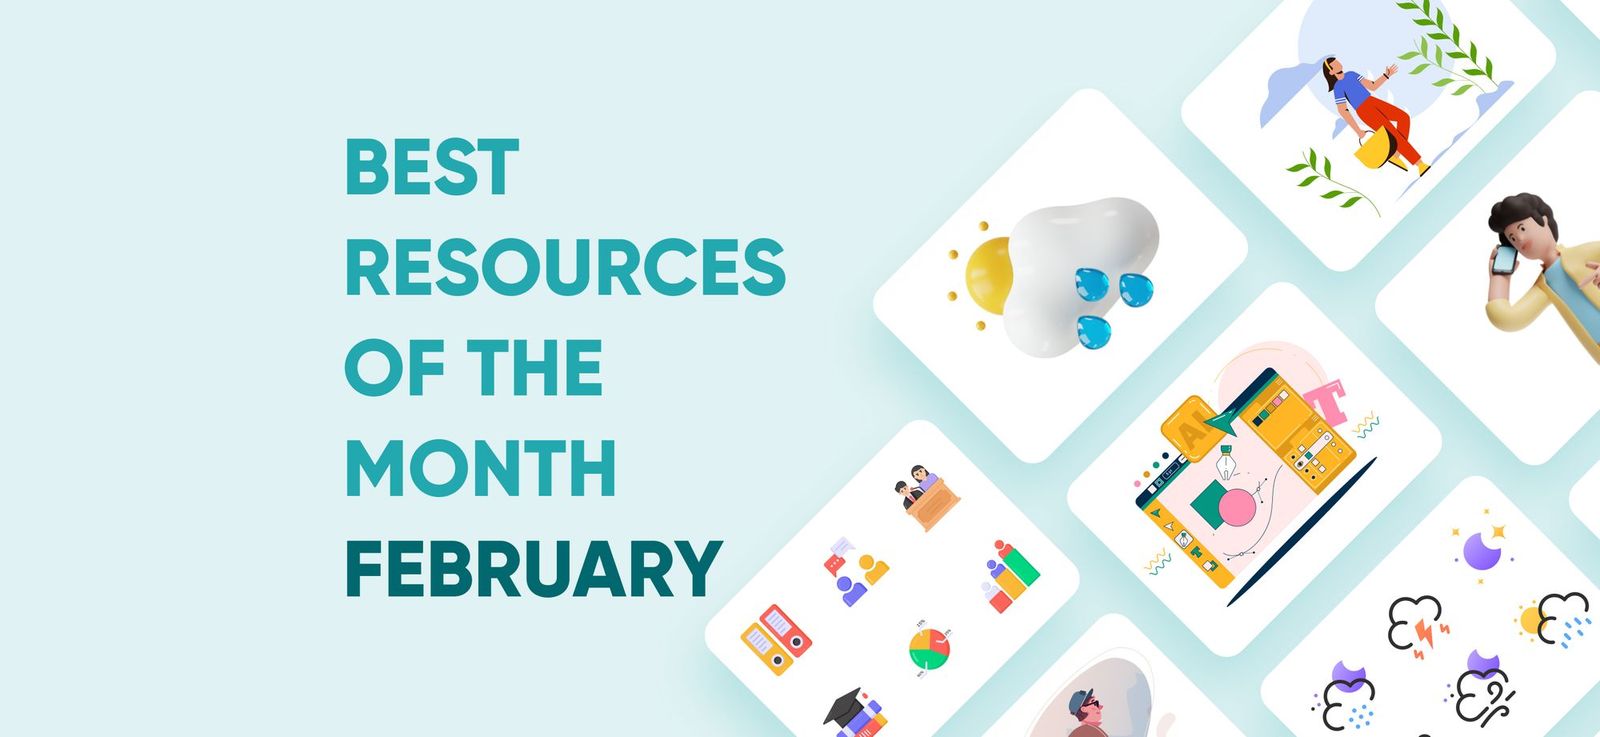 Best Design Resources Of The Month - February 2021